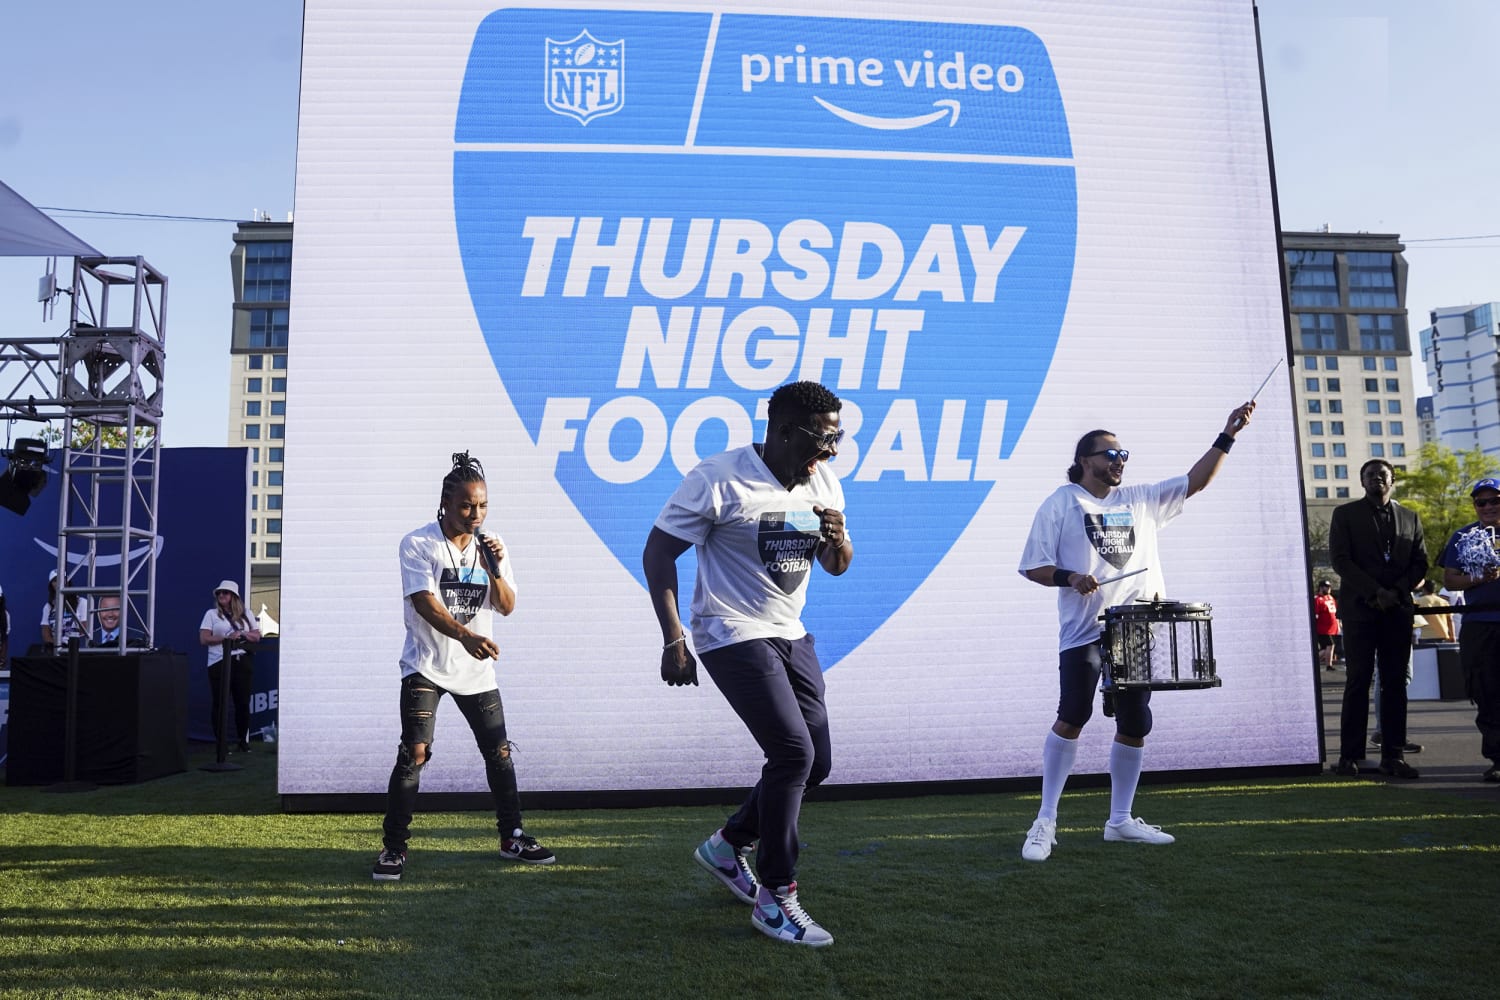 NFL on  Prime Video is the latest foray by leagues into